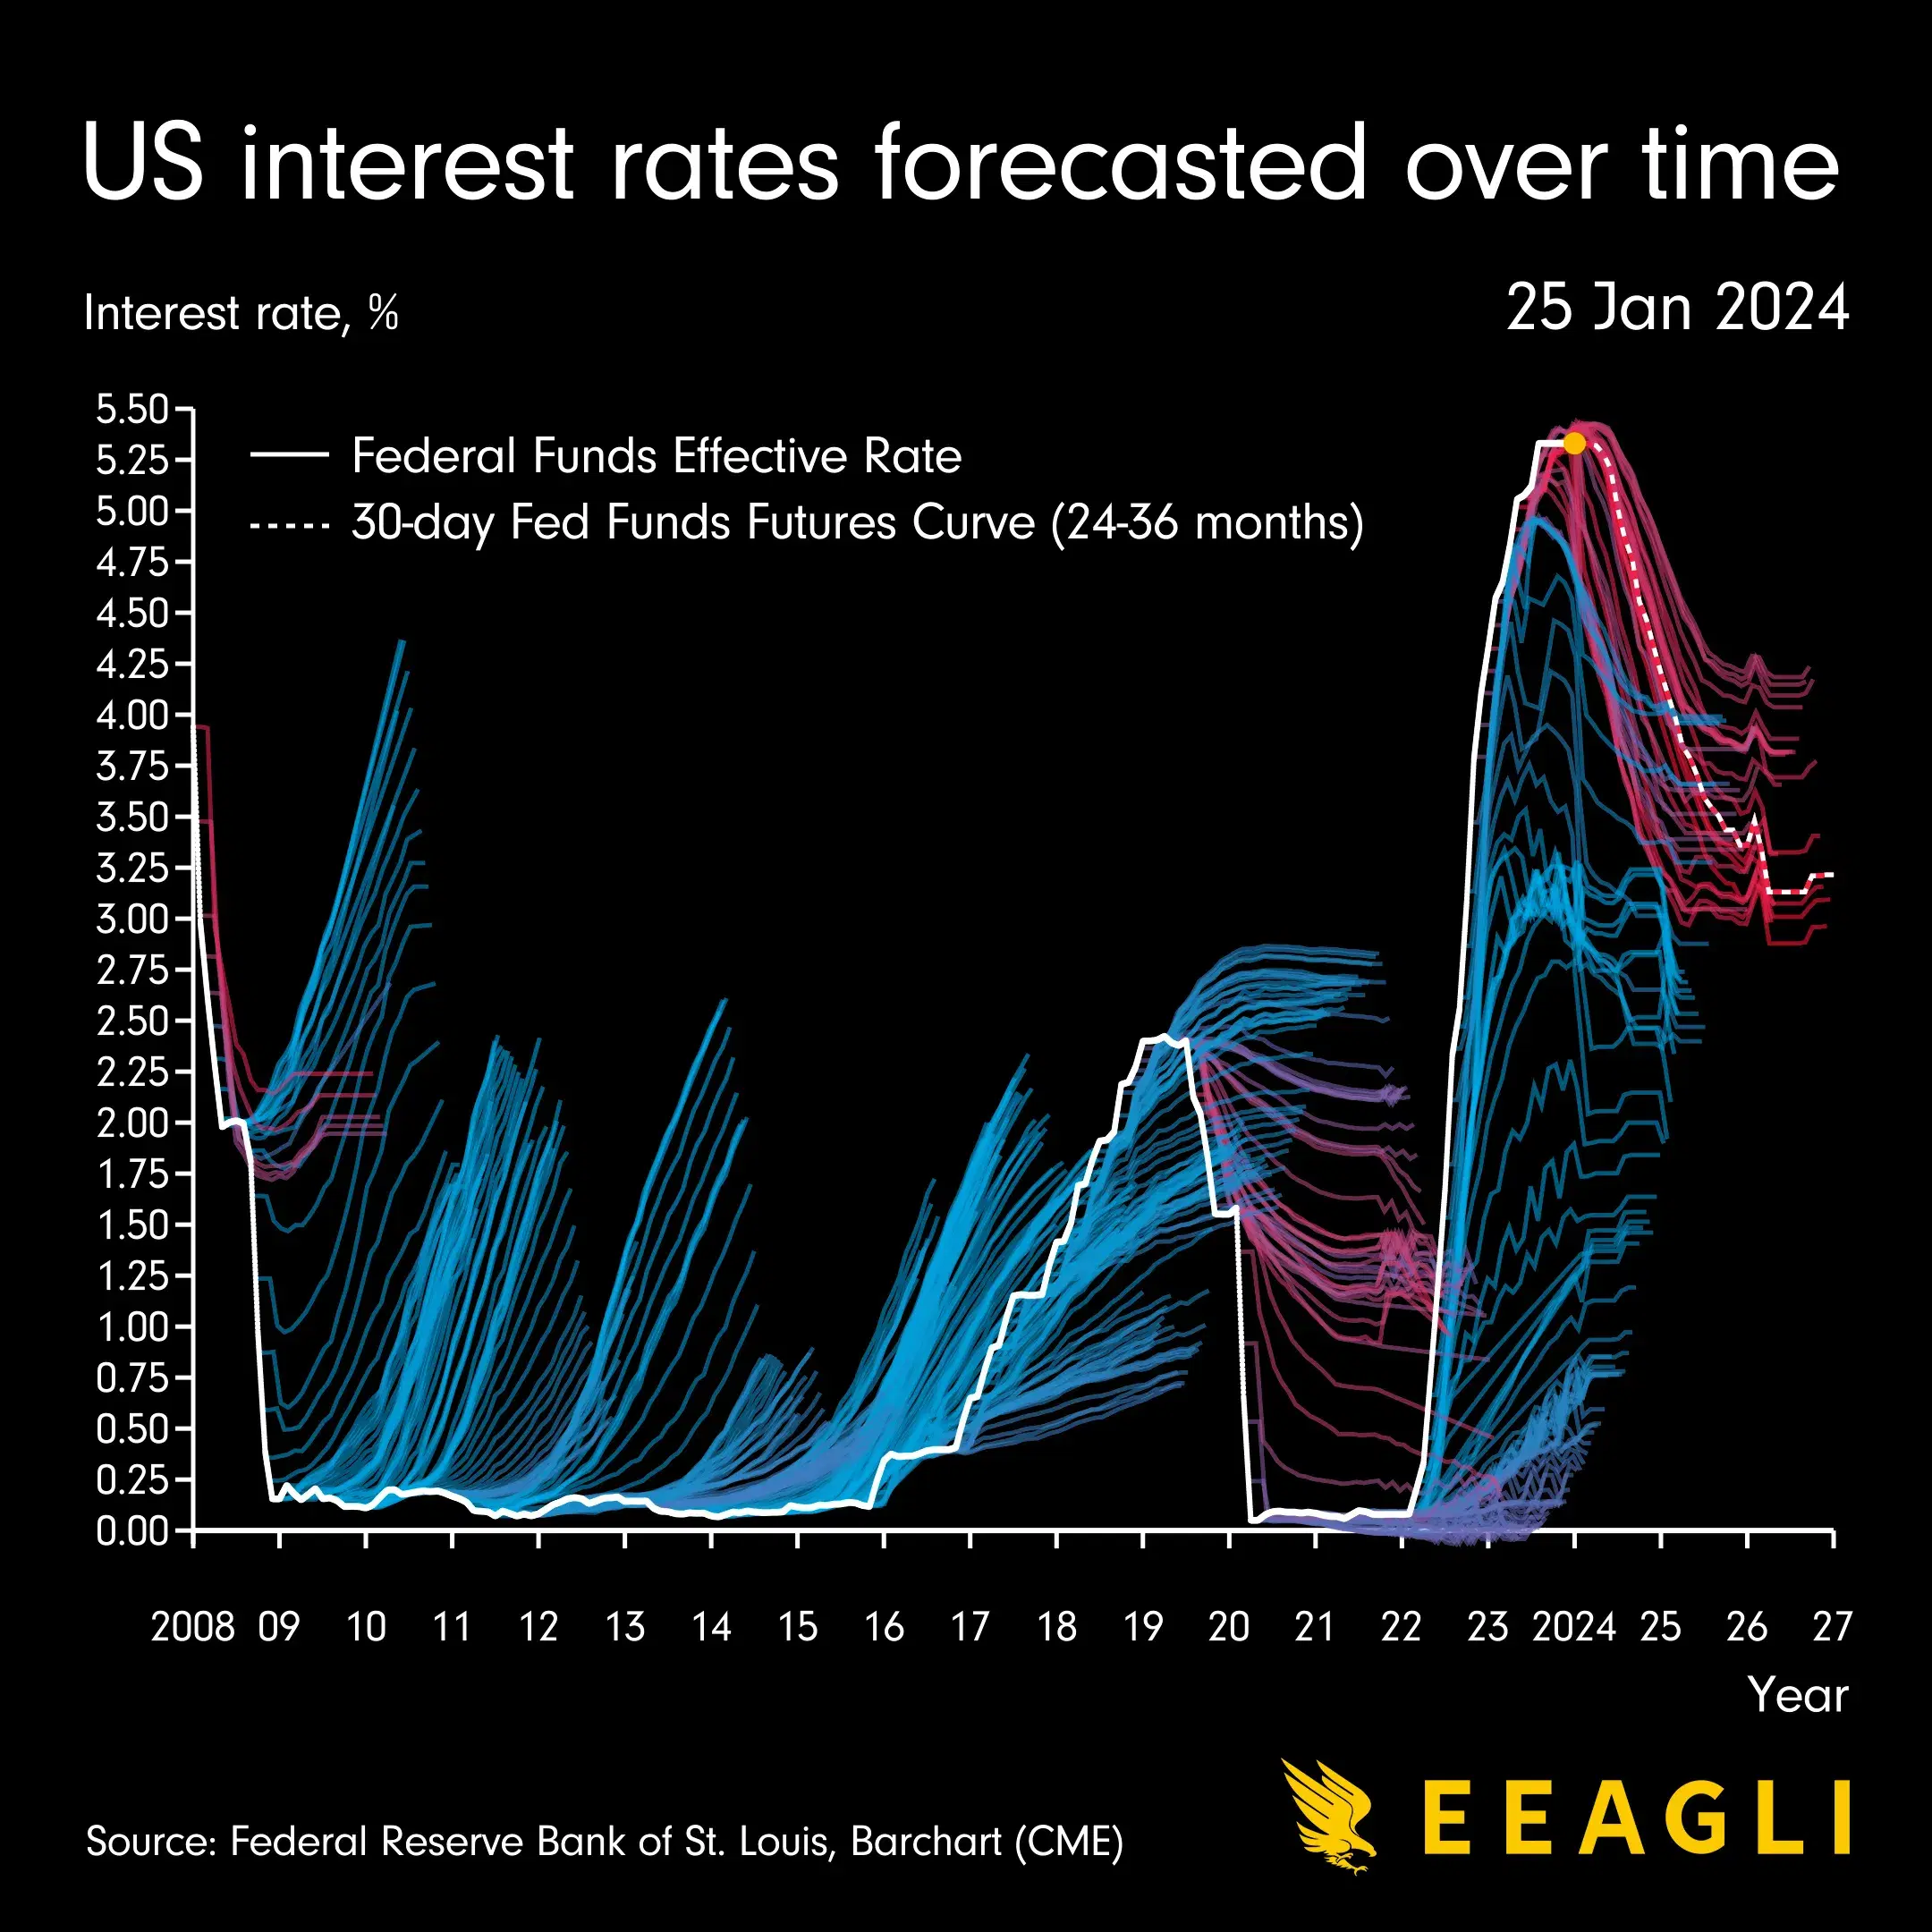 US interest rates forecasted over time